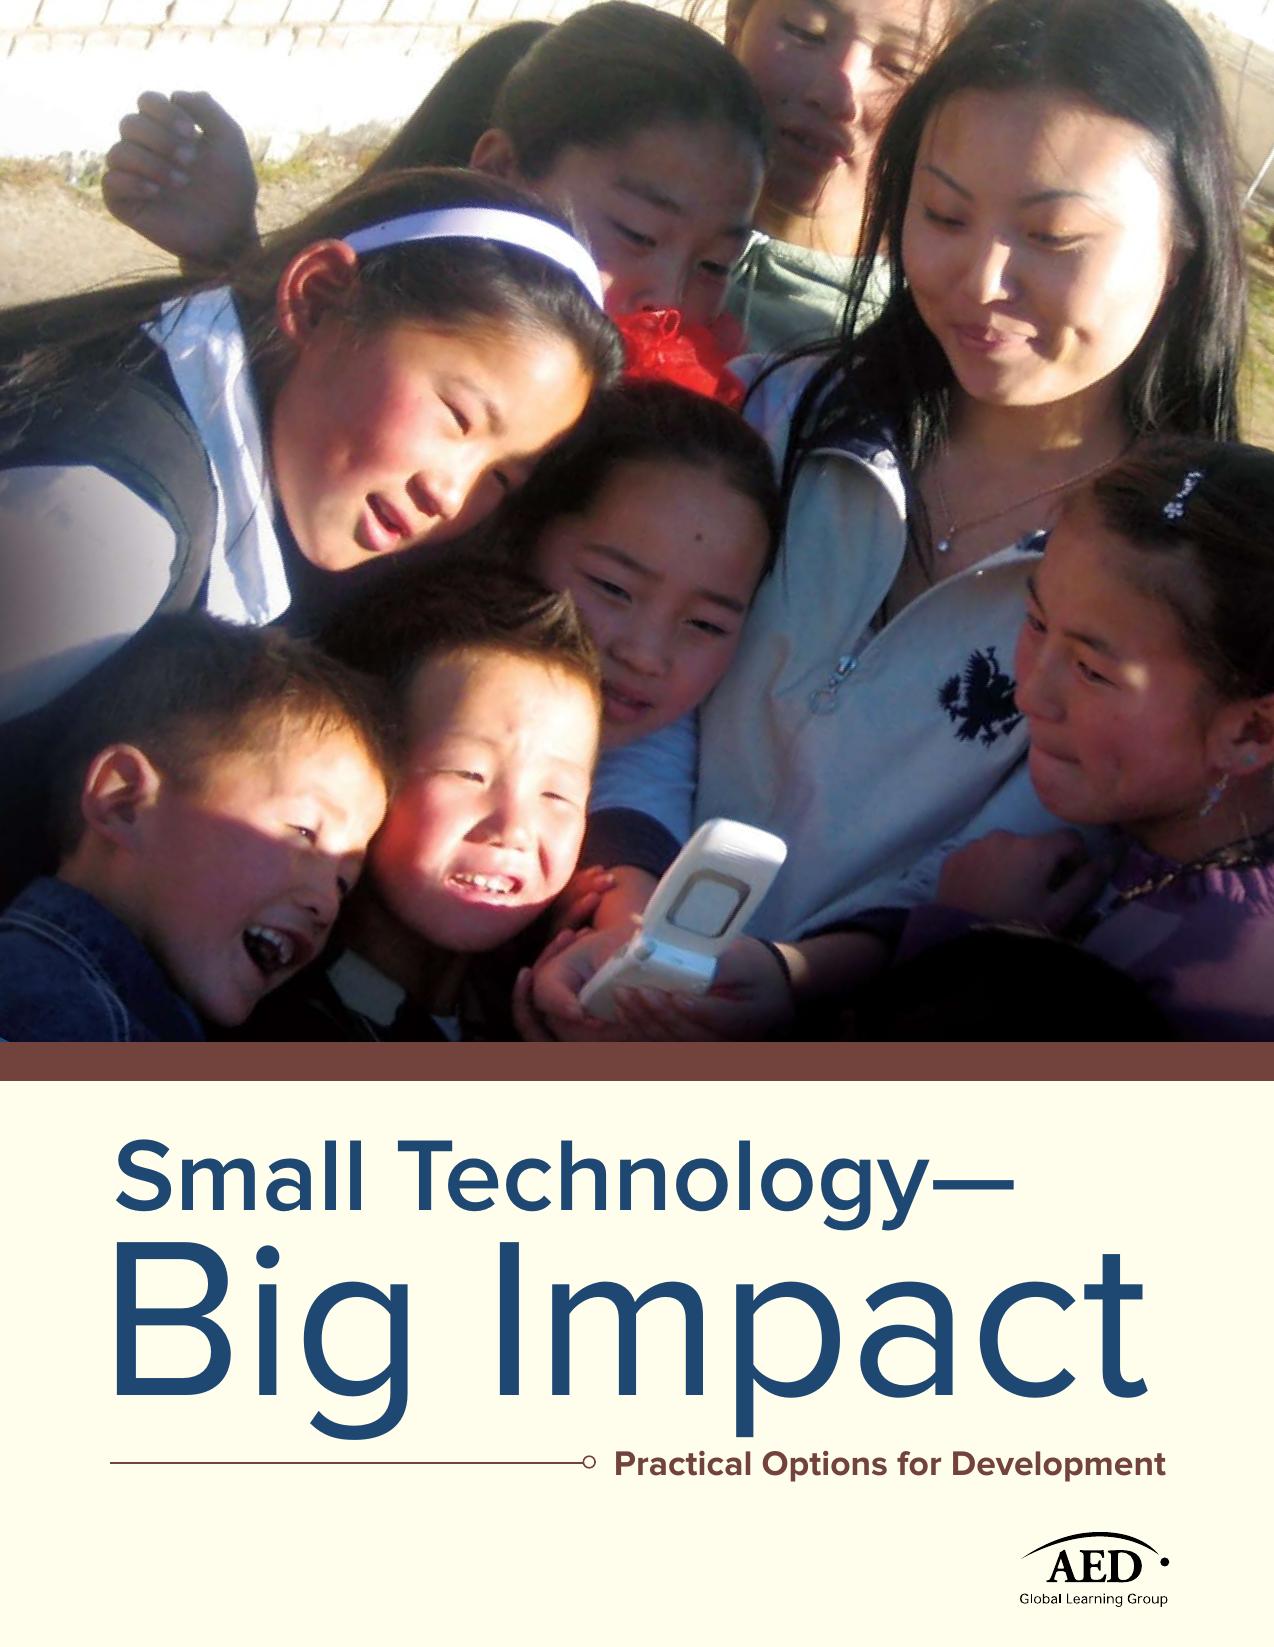 Small Technology - Big Impact: Practical Options for Development